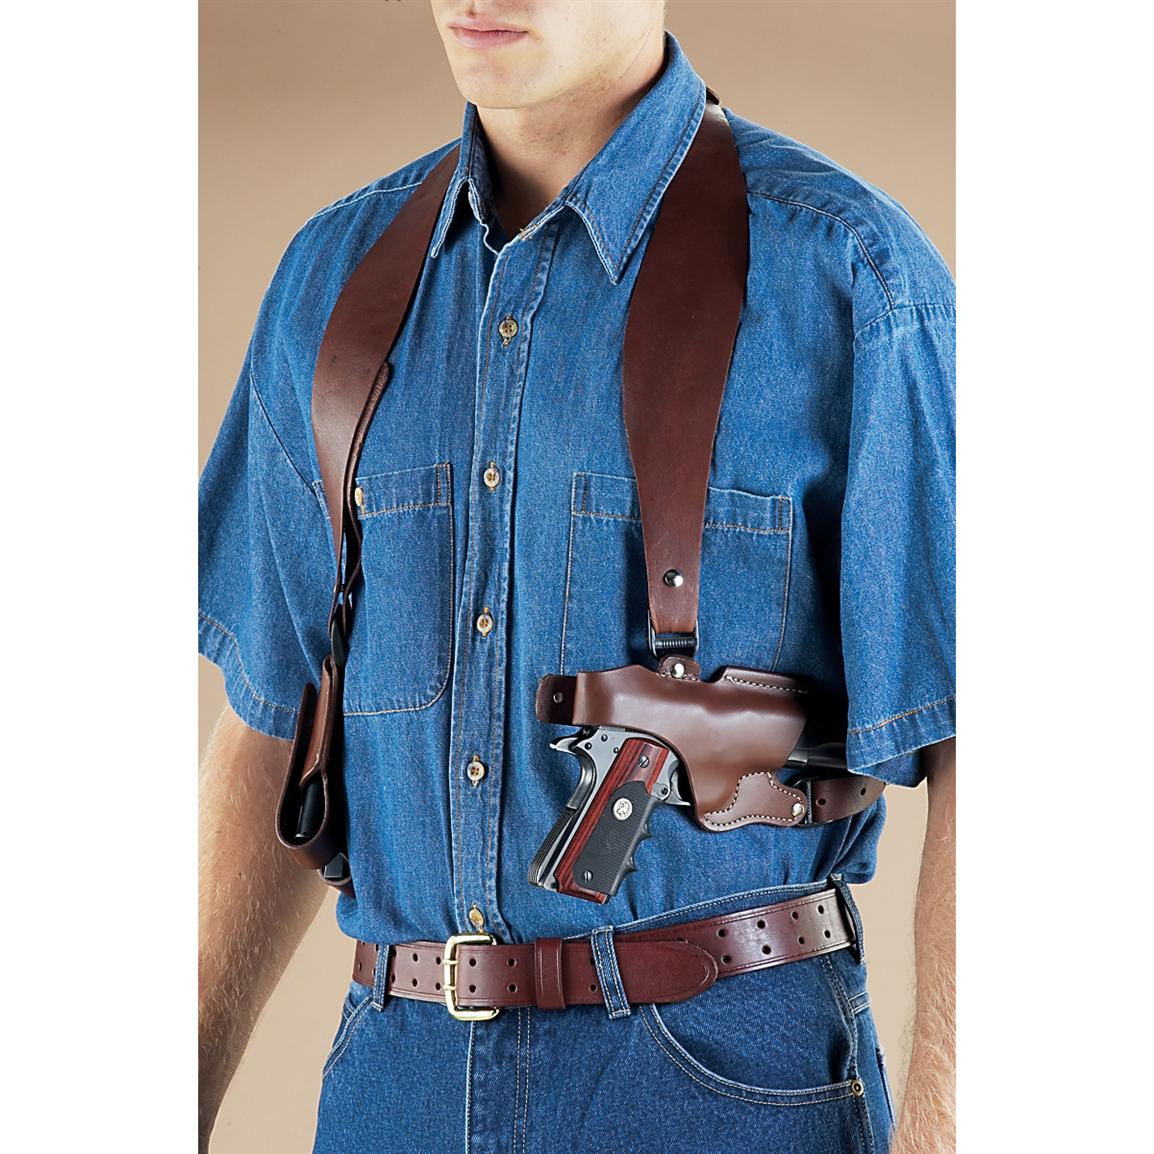 Classic Old West Styles Leather Shoulder Holster with Double Mag Pouch ...